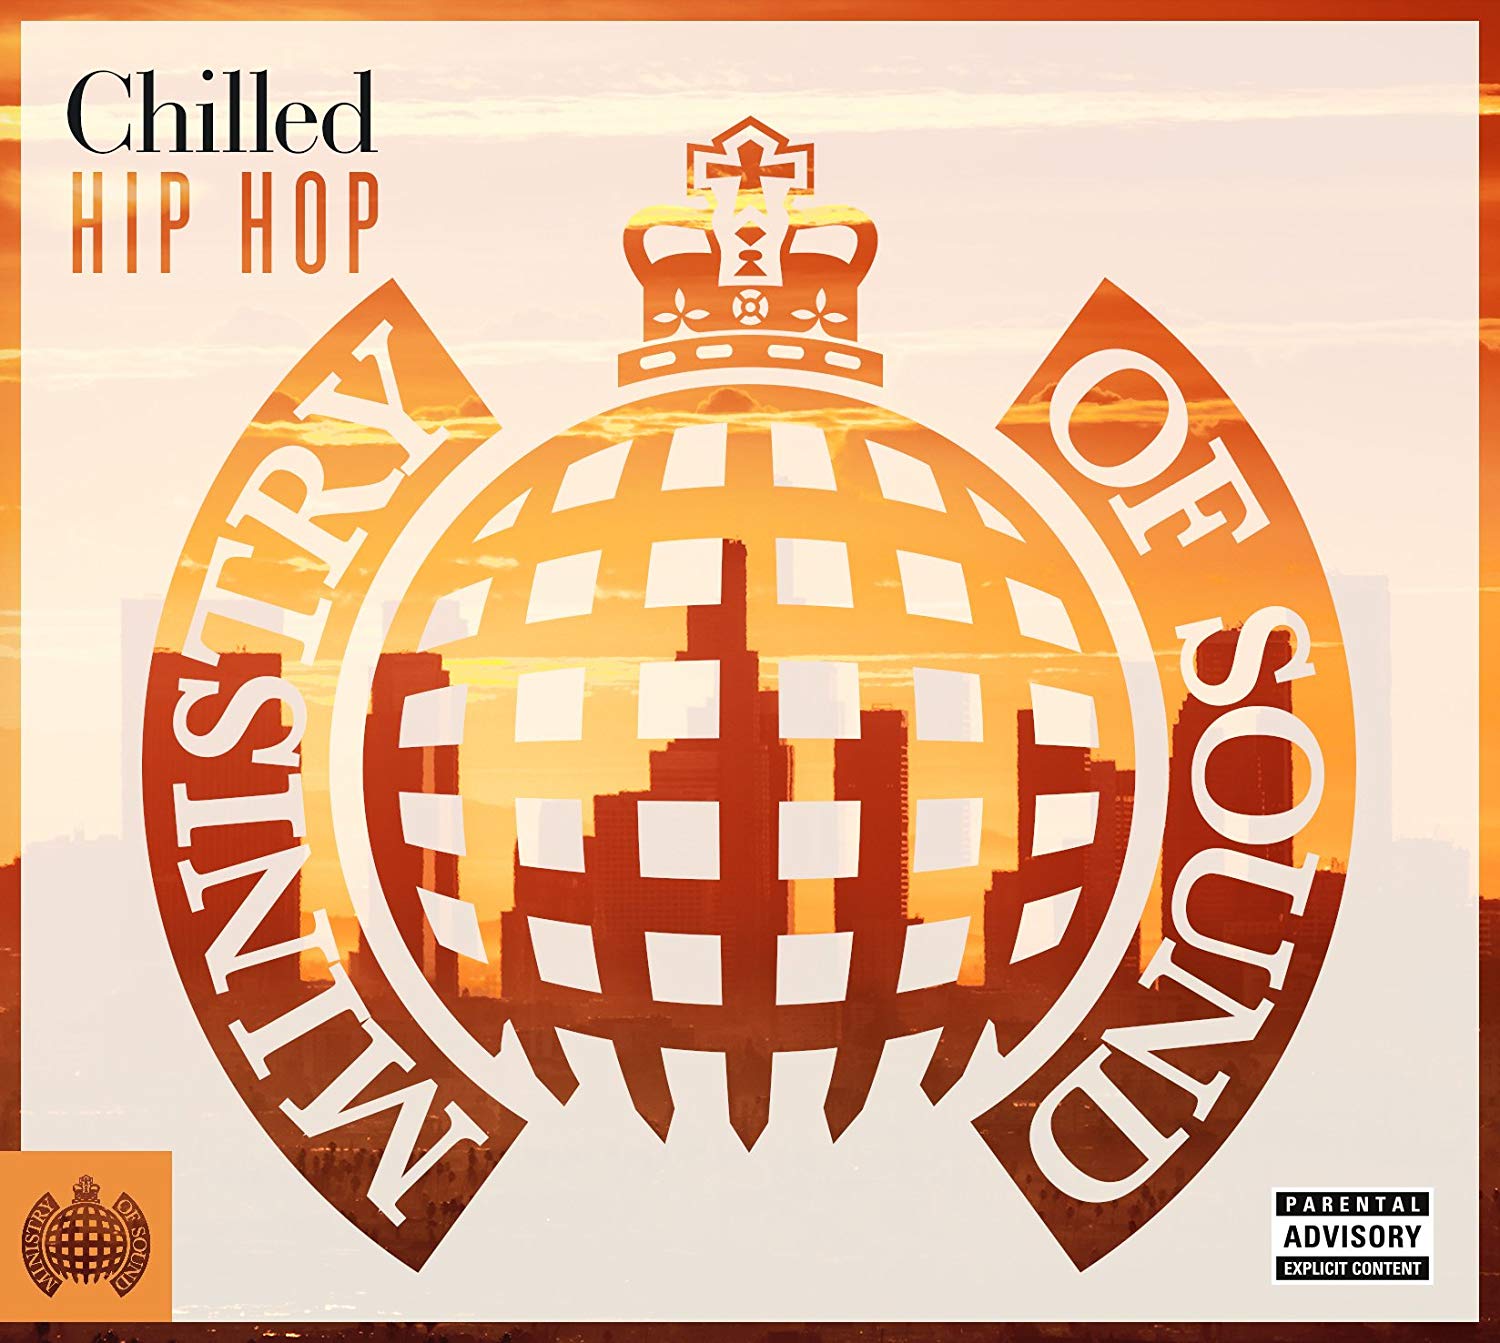 Chill hip hop. Ministry of Sound Chilled. Ministry of Sound. Ministry of Sound Chill 3 CD. Ministry of Sound - (2008) Chilled 1991-2008 3cd.